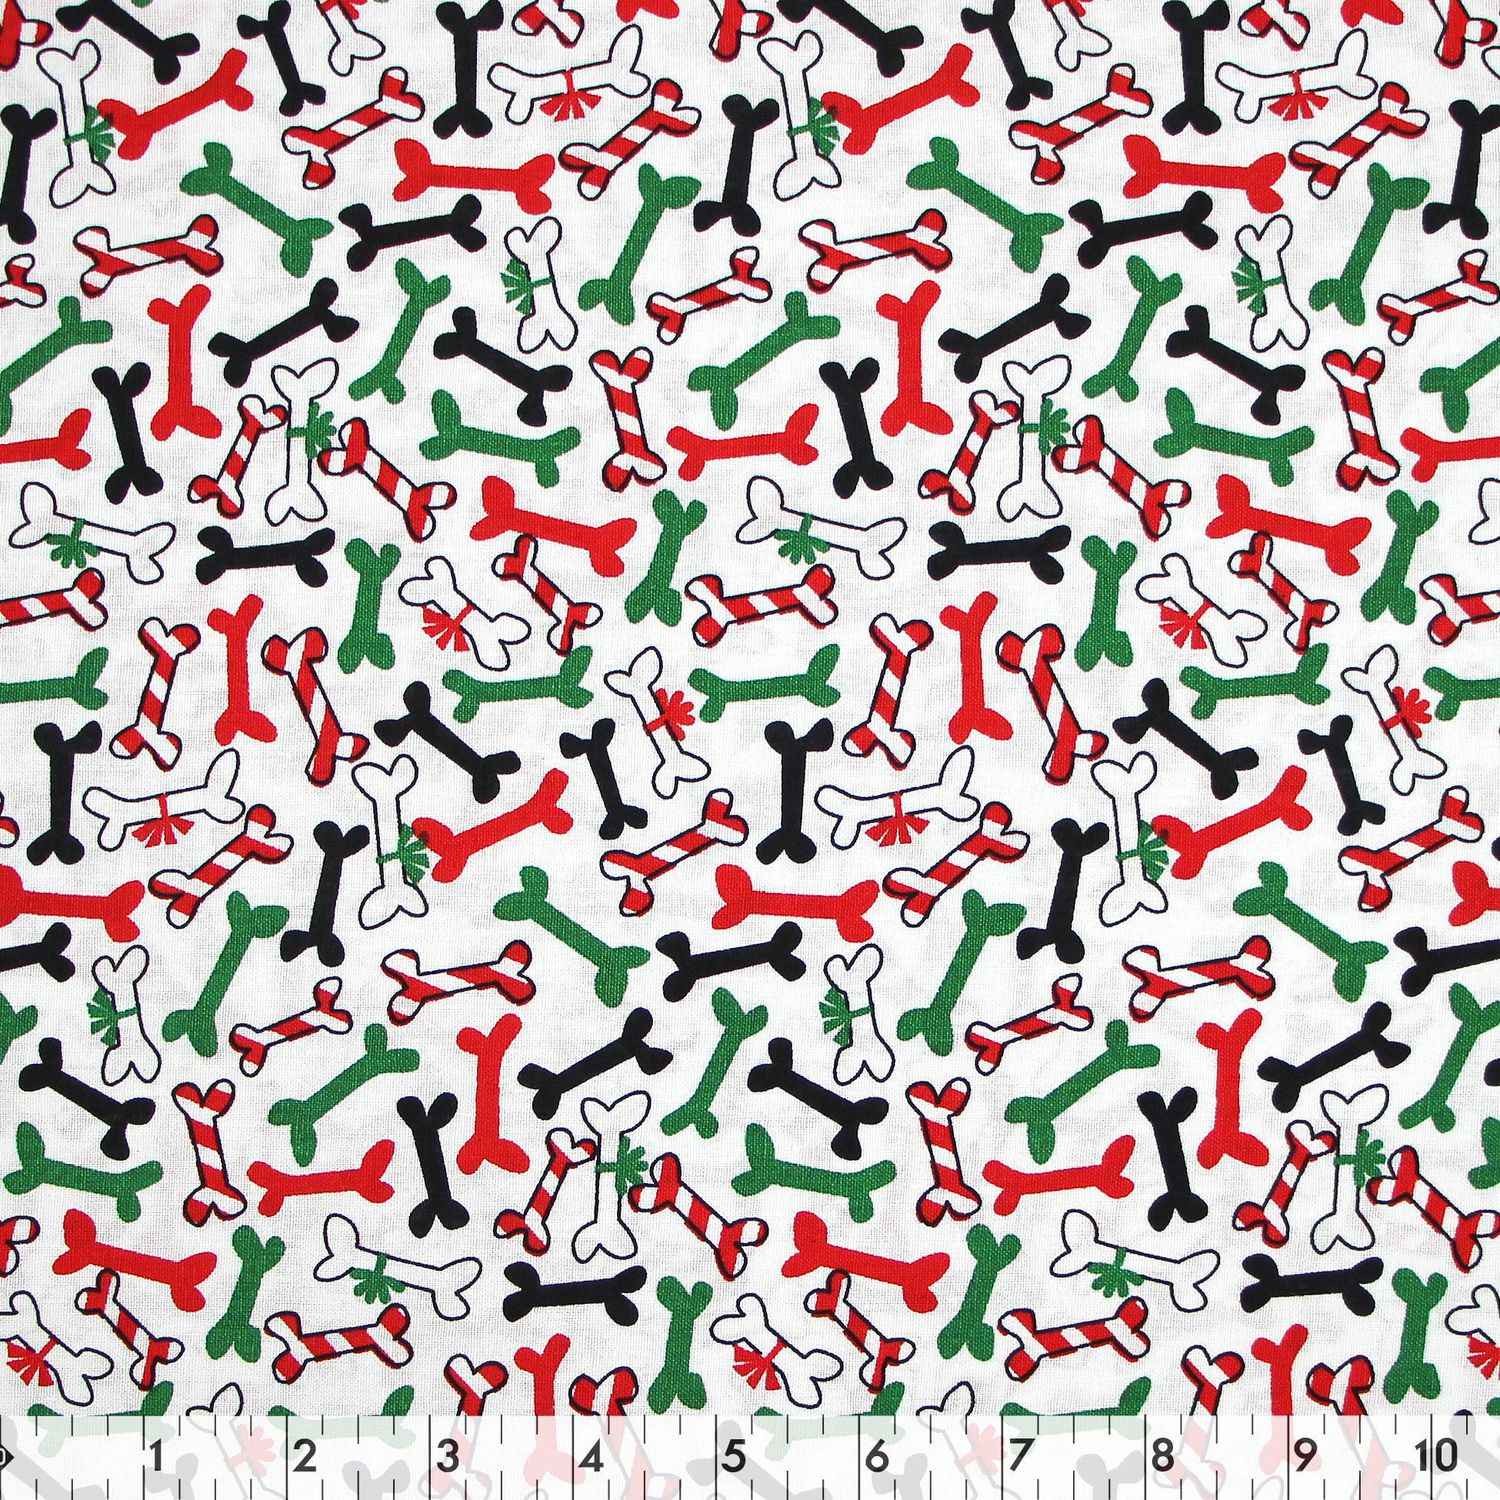 Fabric Creations White with Christmas Dog Bones Cotton Fabric by the